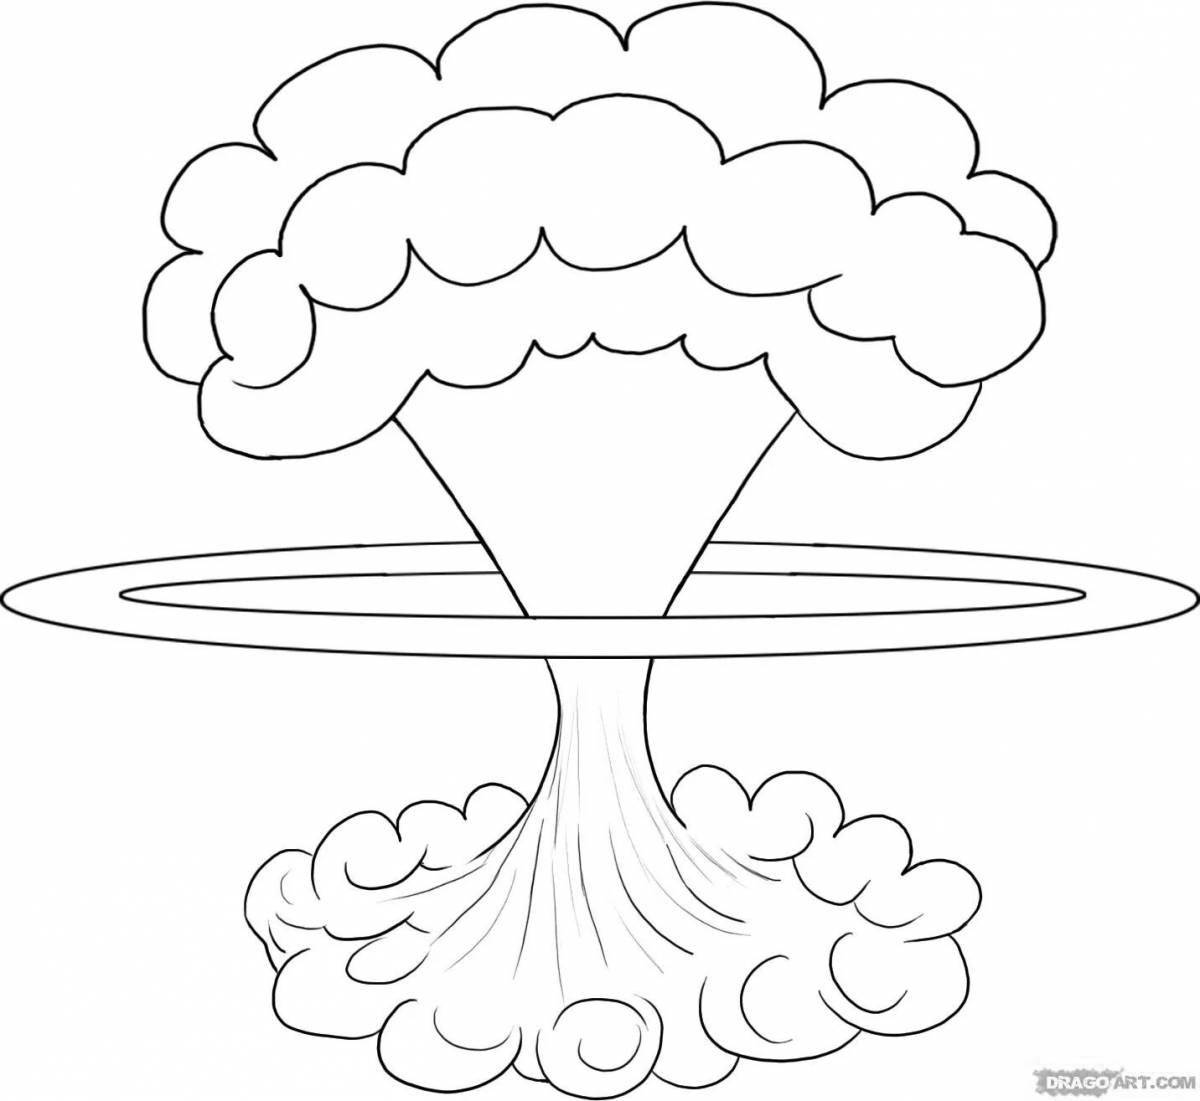 Shocking nuclear explosion coloring book